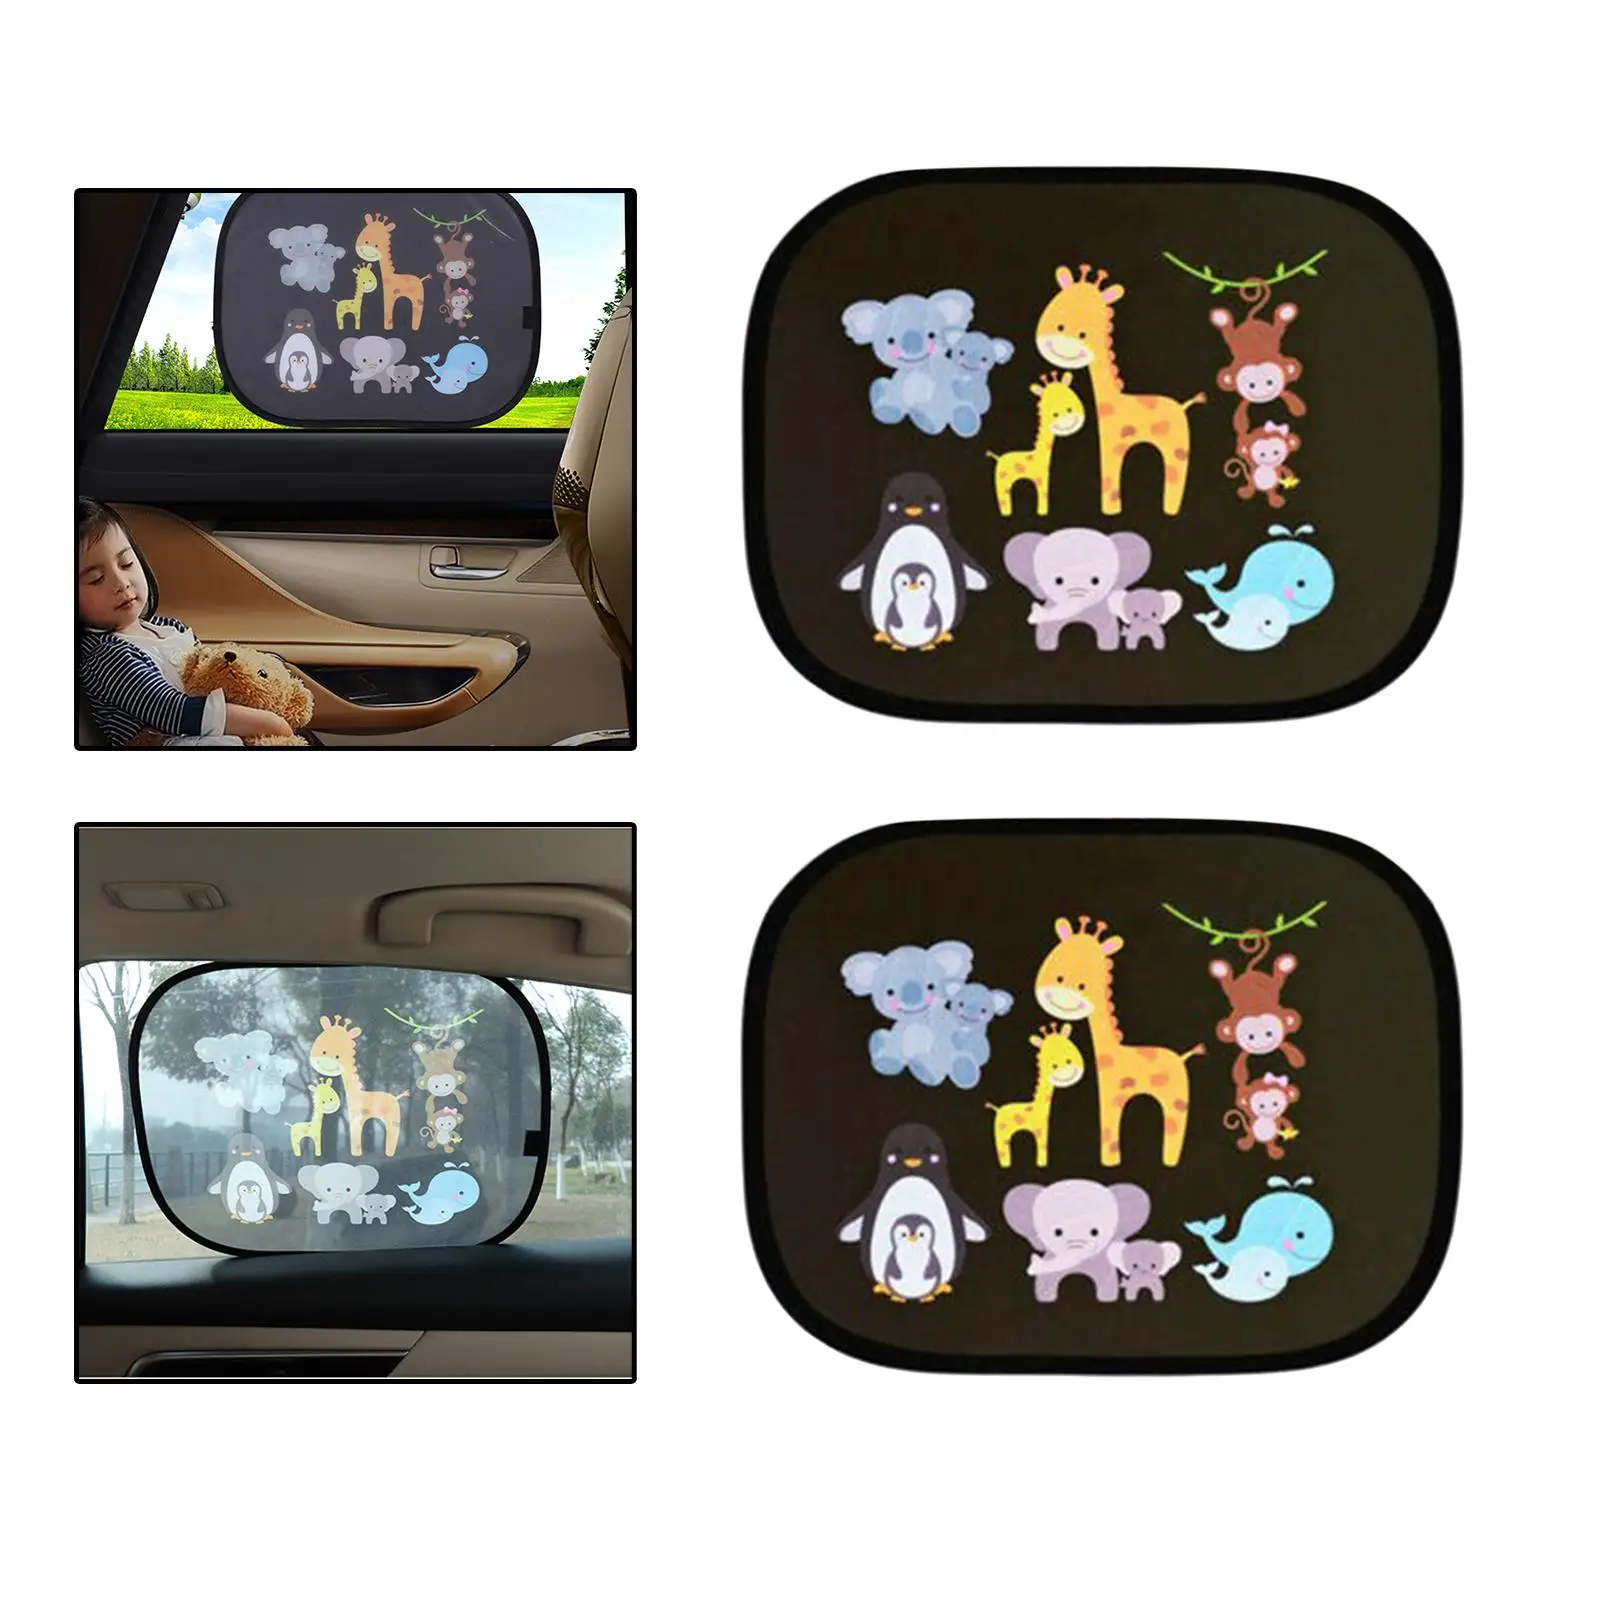 Set of 2 Car Side Window Shade for Baby Kids, Premium Quality 44x36cm Universal Portable